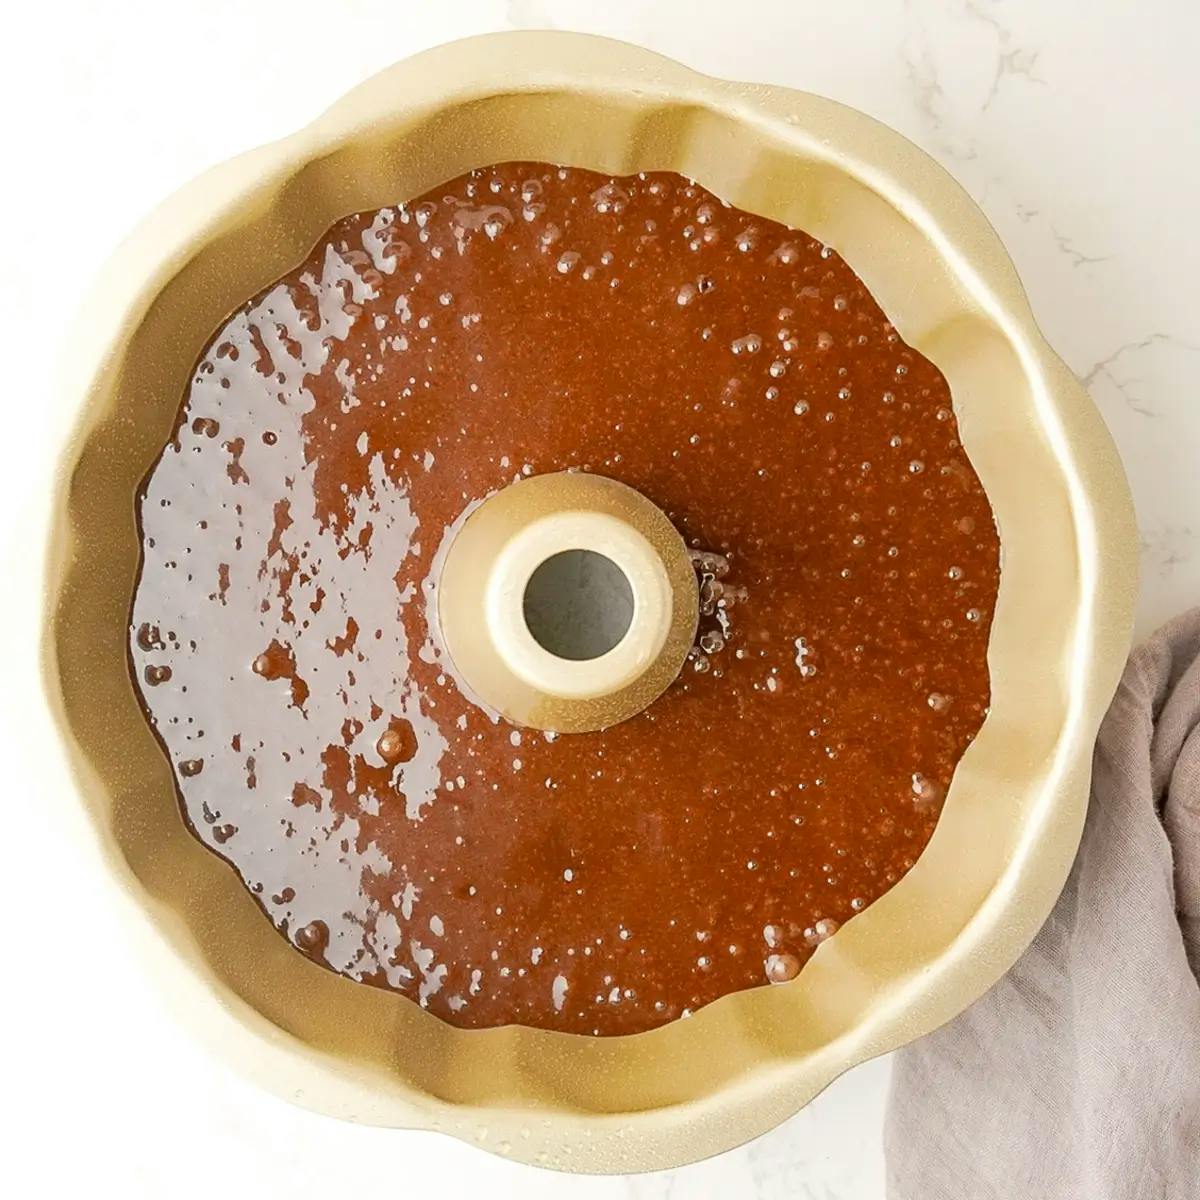 Vegan Chocolate Orange Cake batter in a bundt tin, ready to go into the oven.